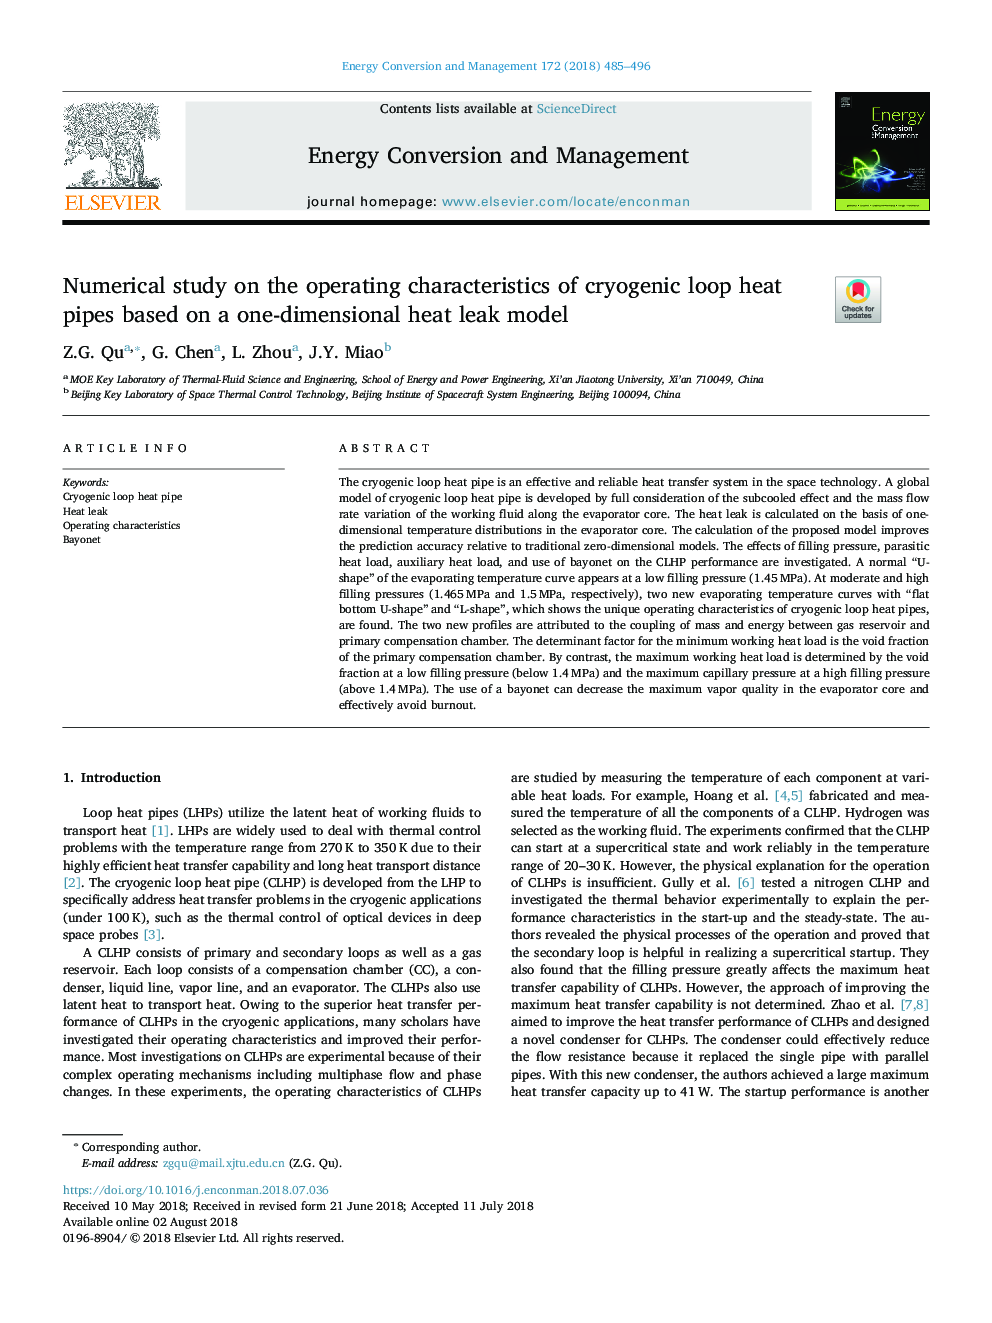 Numerical study on the operating characteristics of cryogenic loop heat pipes based on a one-dimensional heat leak model